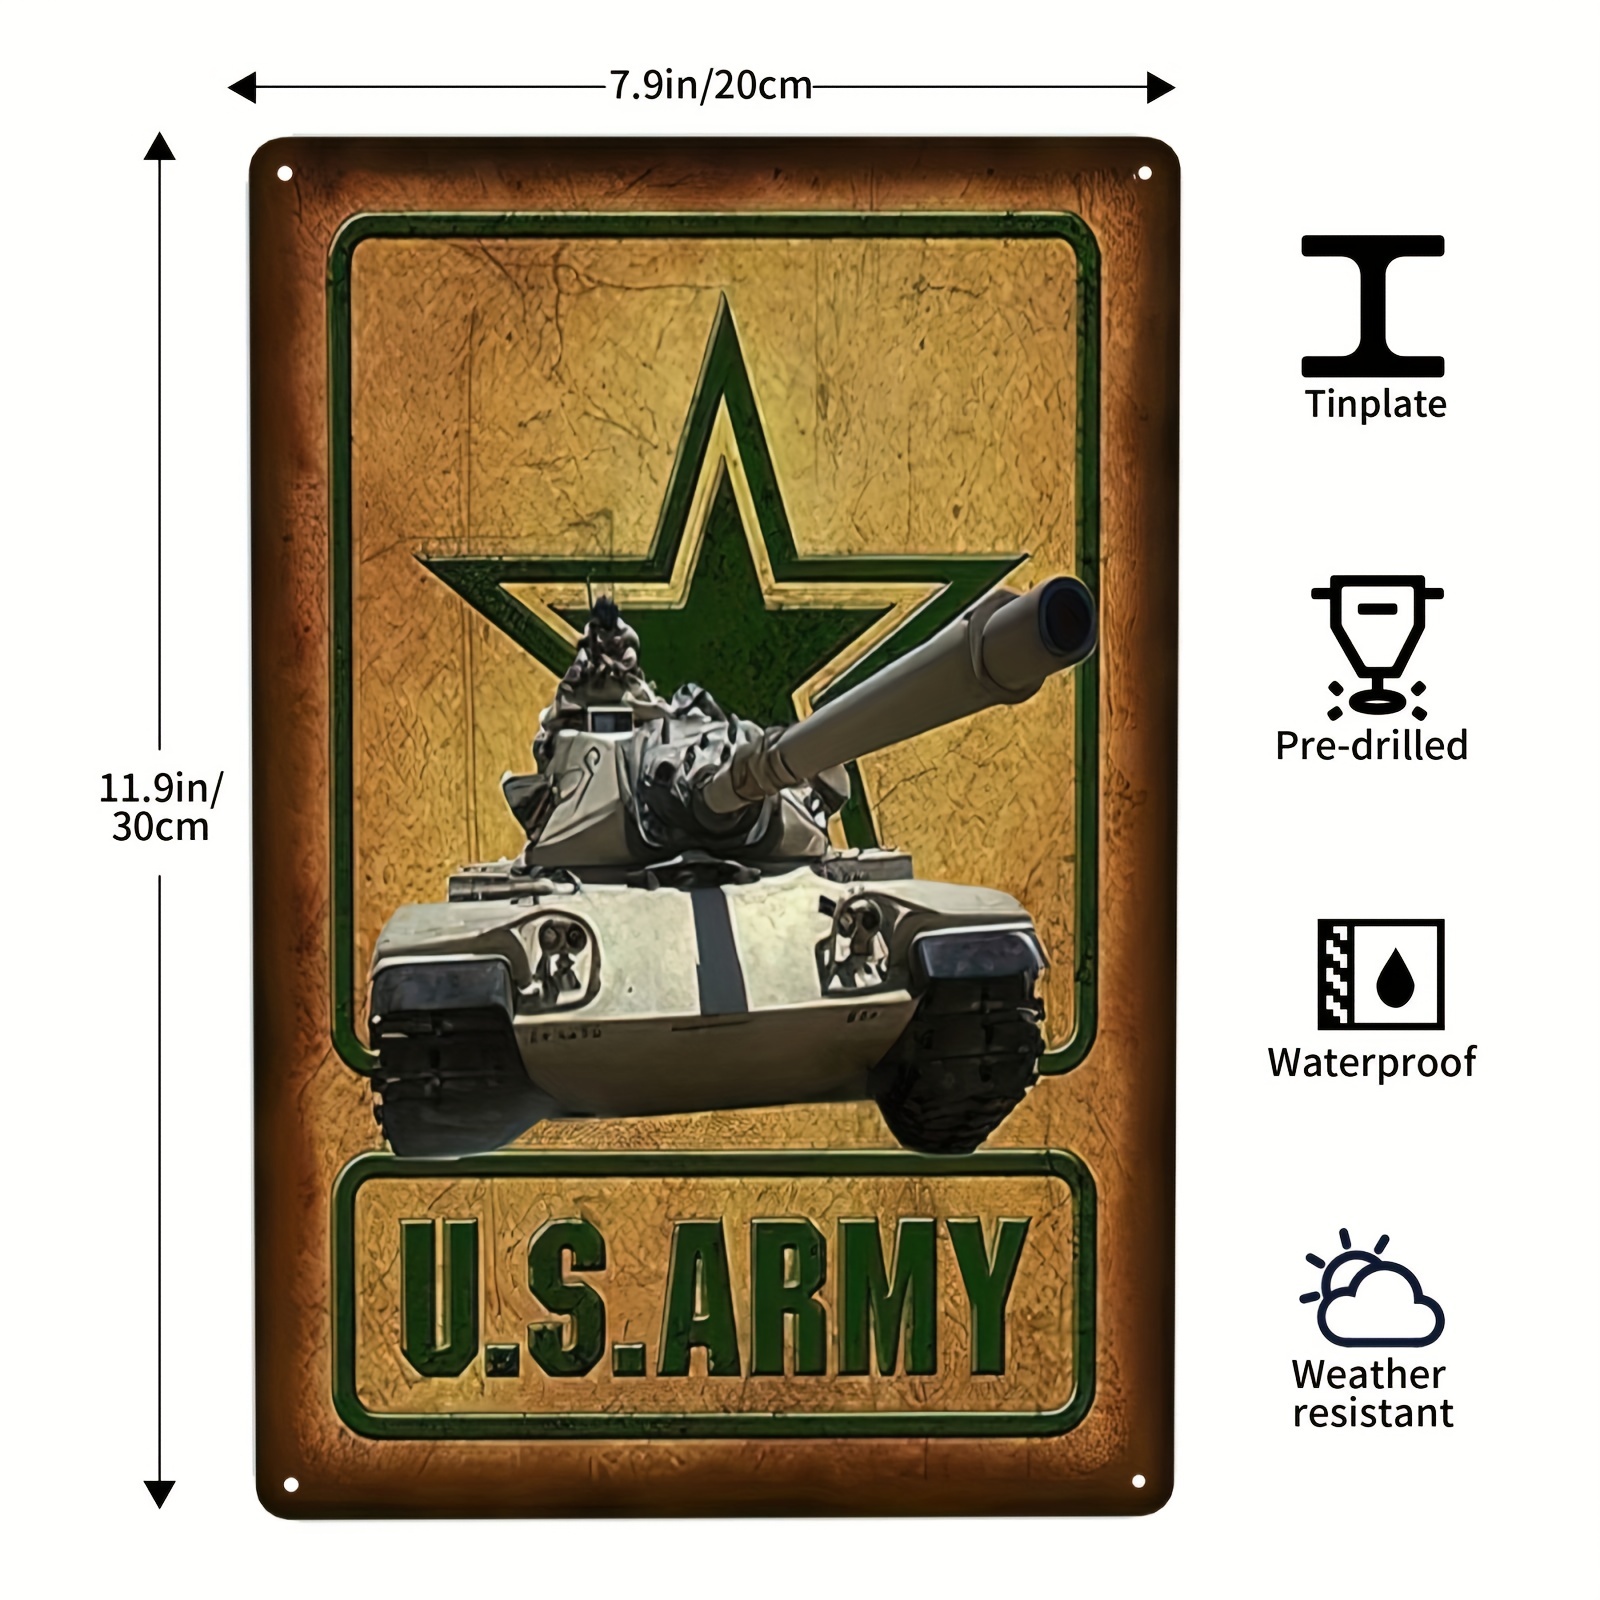 Metal Aluminum Sign, Military Cars American, American Craft Beer Week,  American Patriotic, Usa American Flag Metal Aluminum Sign Wall Decor For  Man Cave Bar, Stand Up Or Get Out Patriotic Aluminum Sign, 